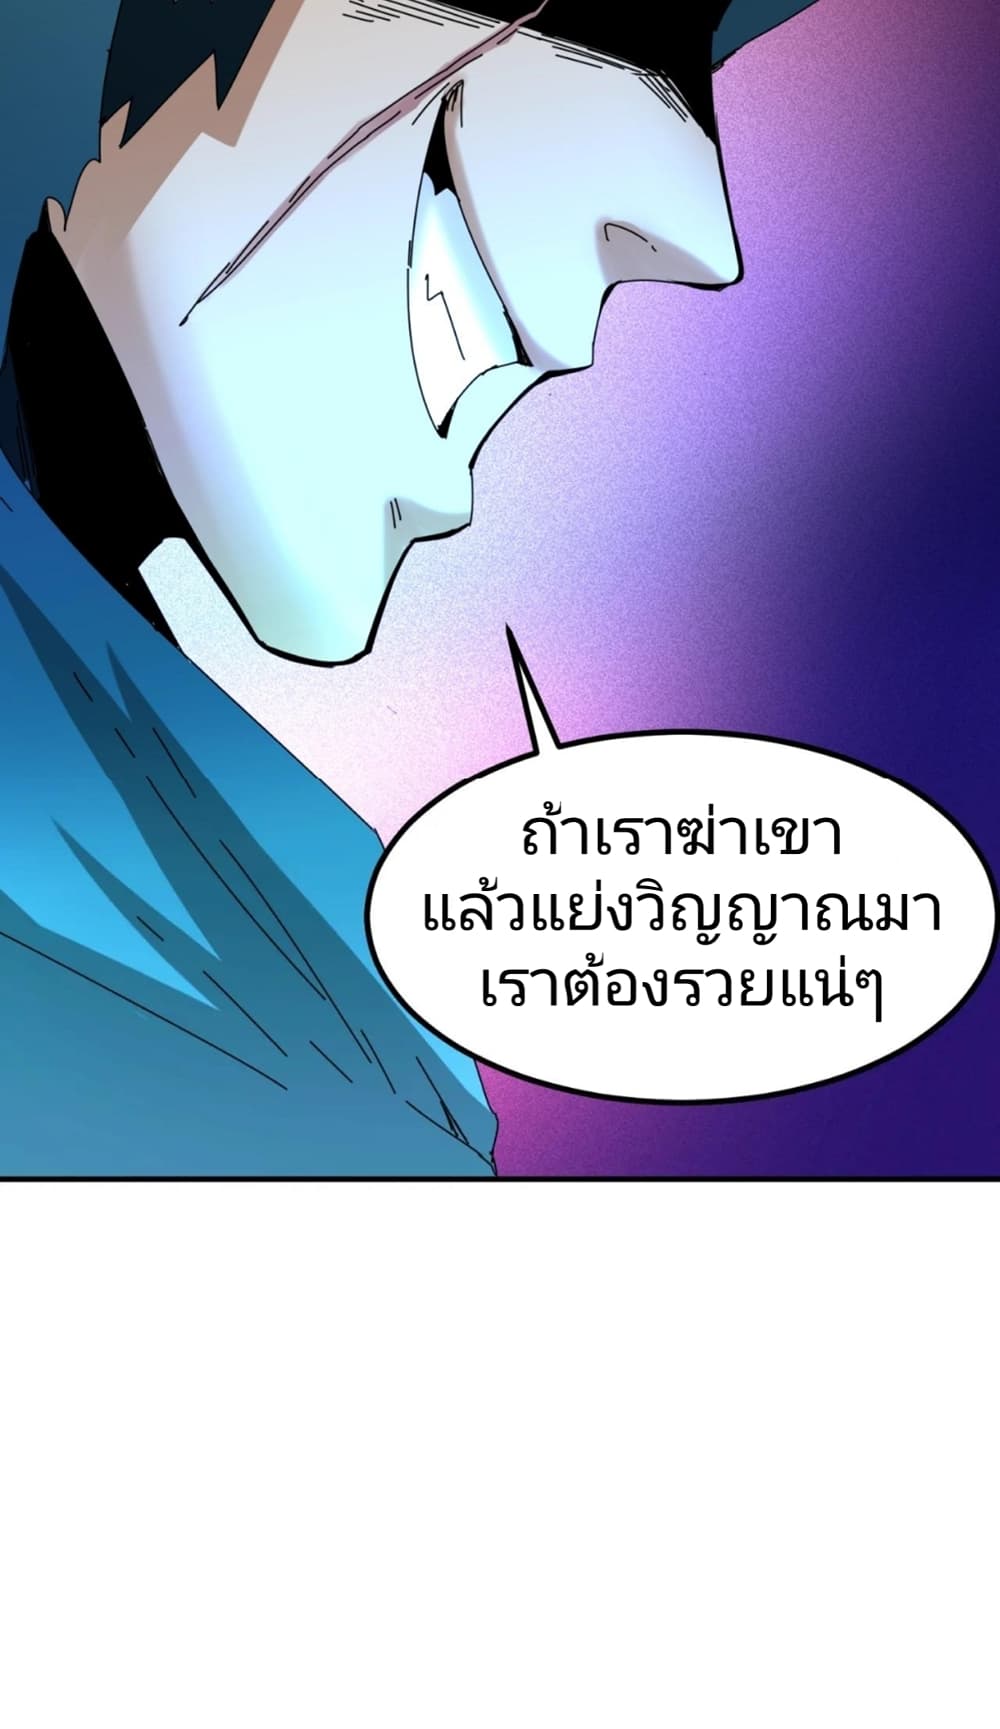 The Age of Ghost Spirits à¸à¸­à¸à¸à¸µà¹ 8 (53)